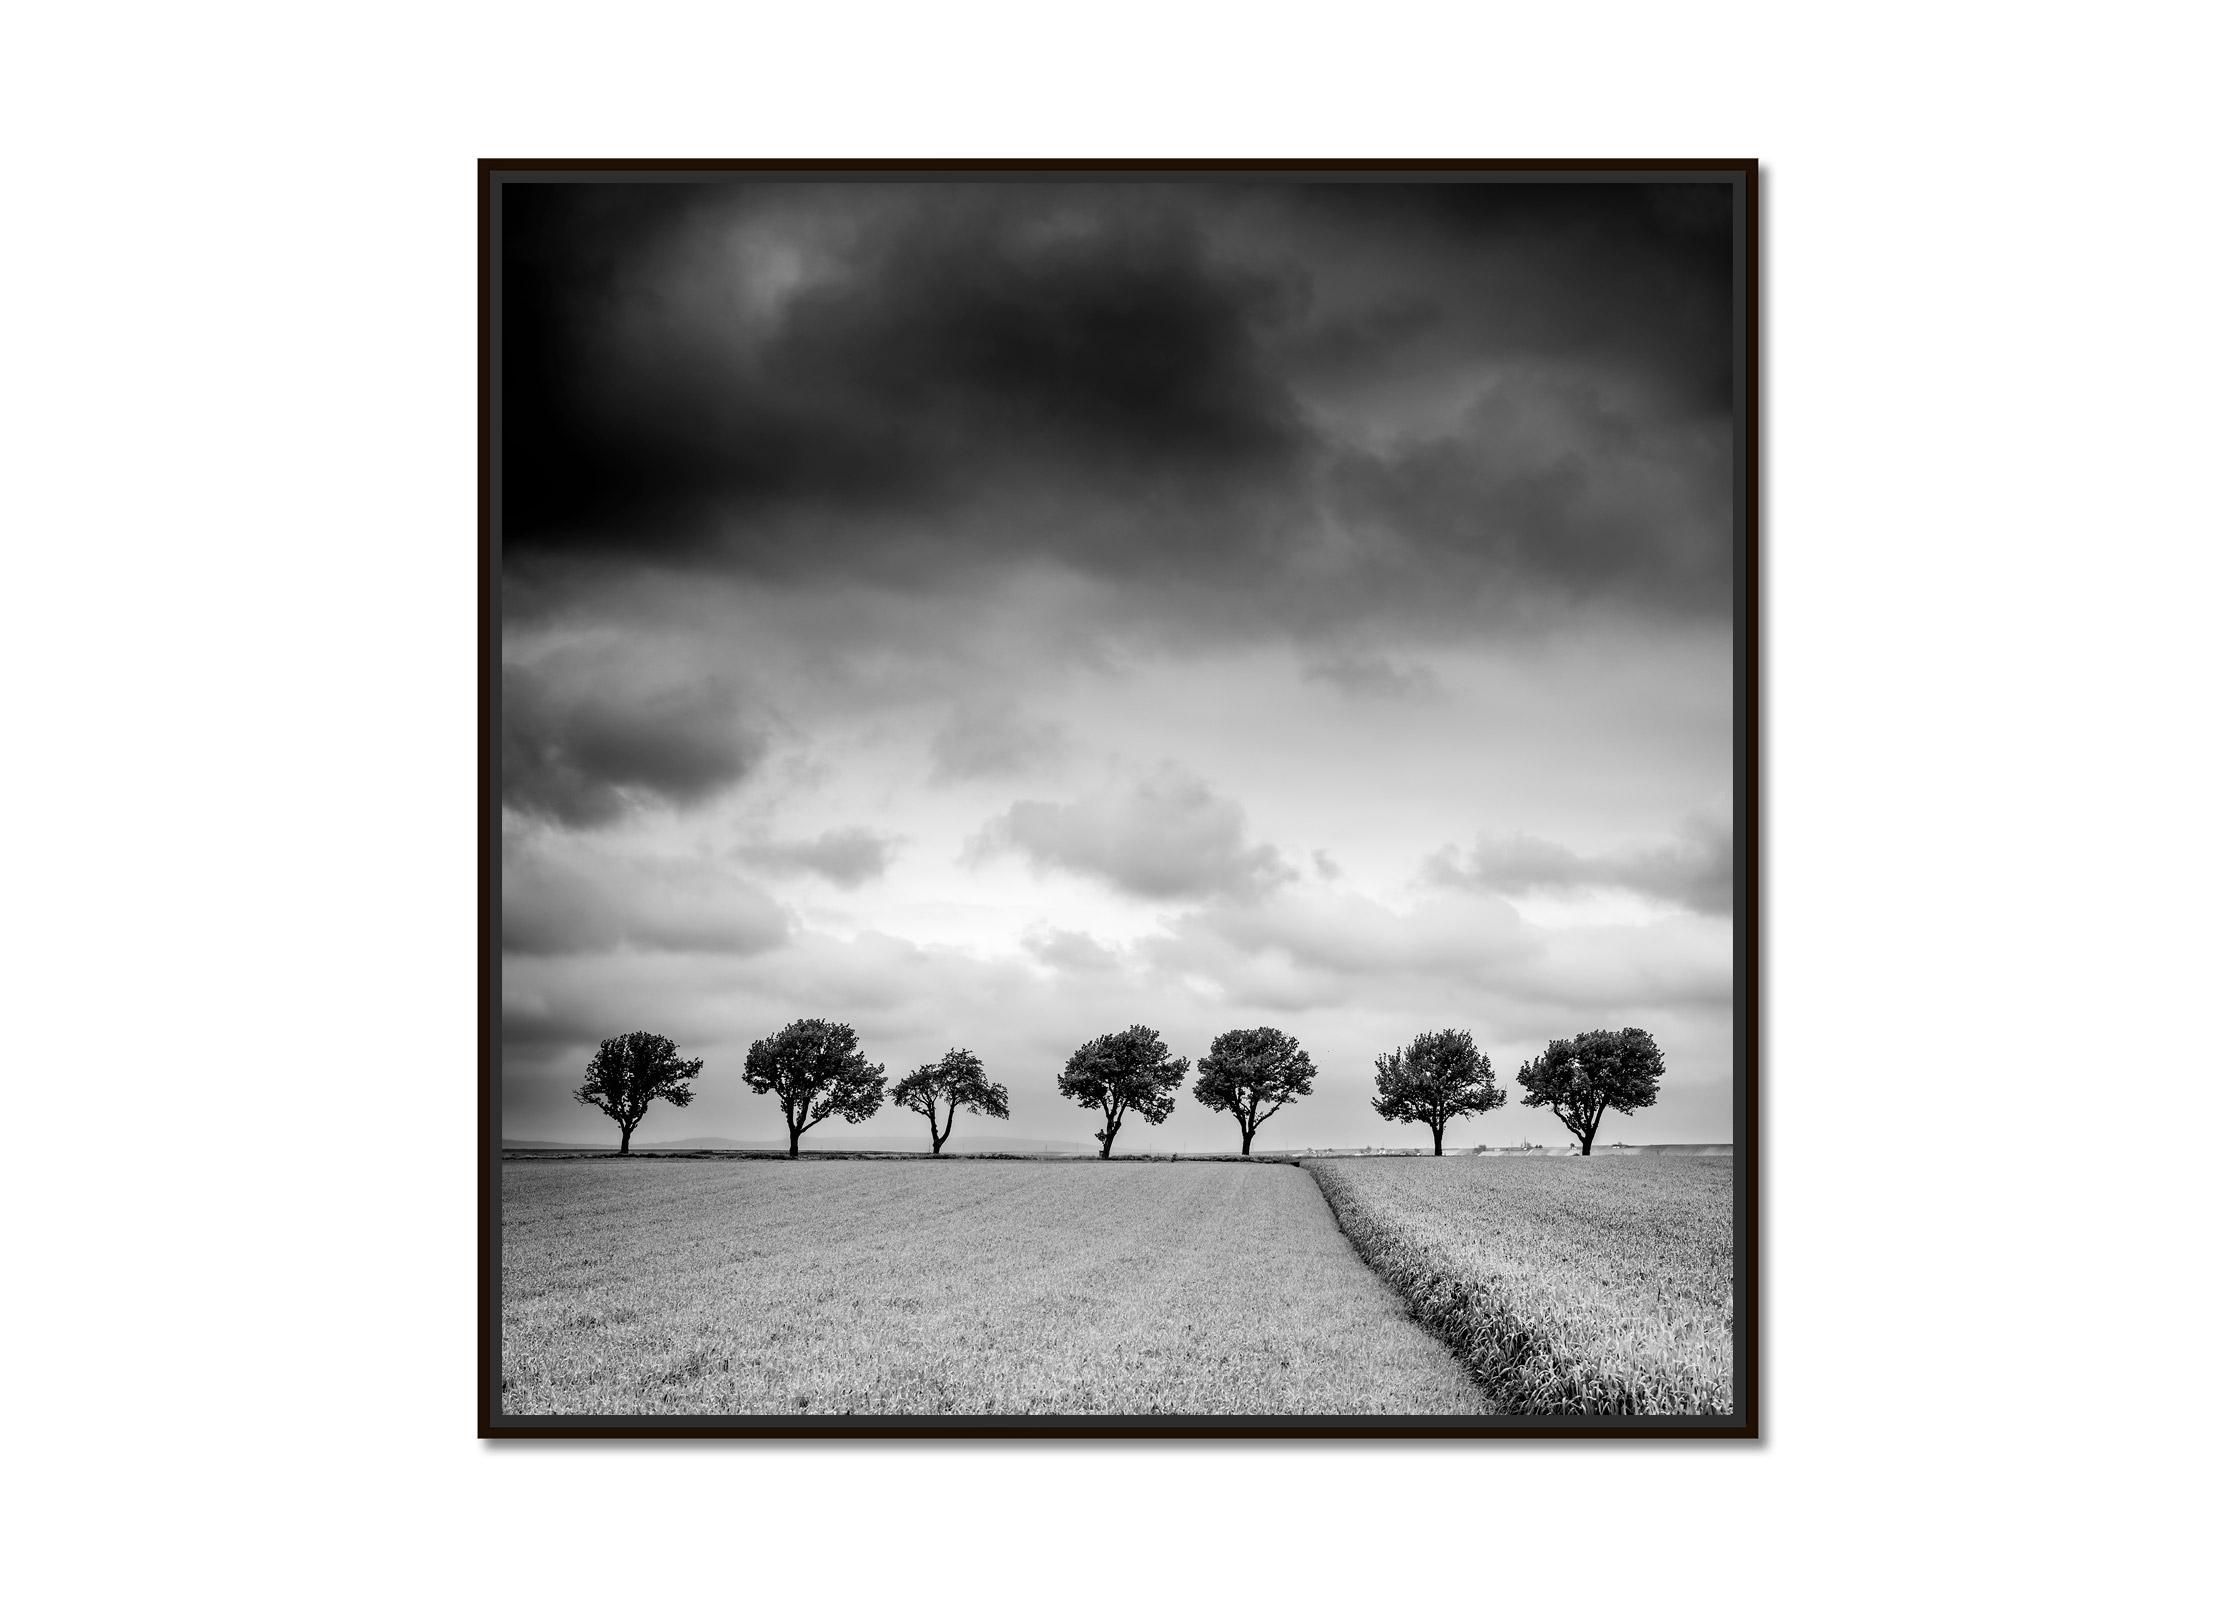 Trees on the edge of Field, cloudy, storm, black white art landscape photography - Print by Gerald Berghammer